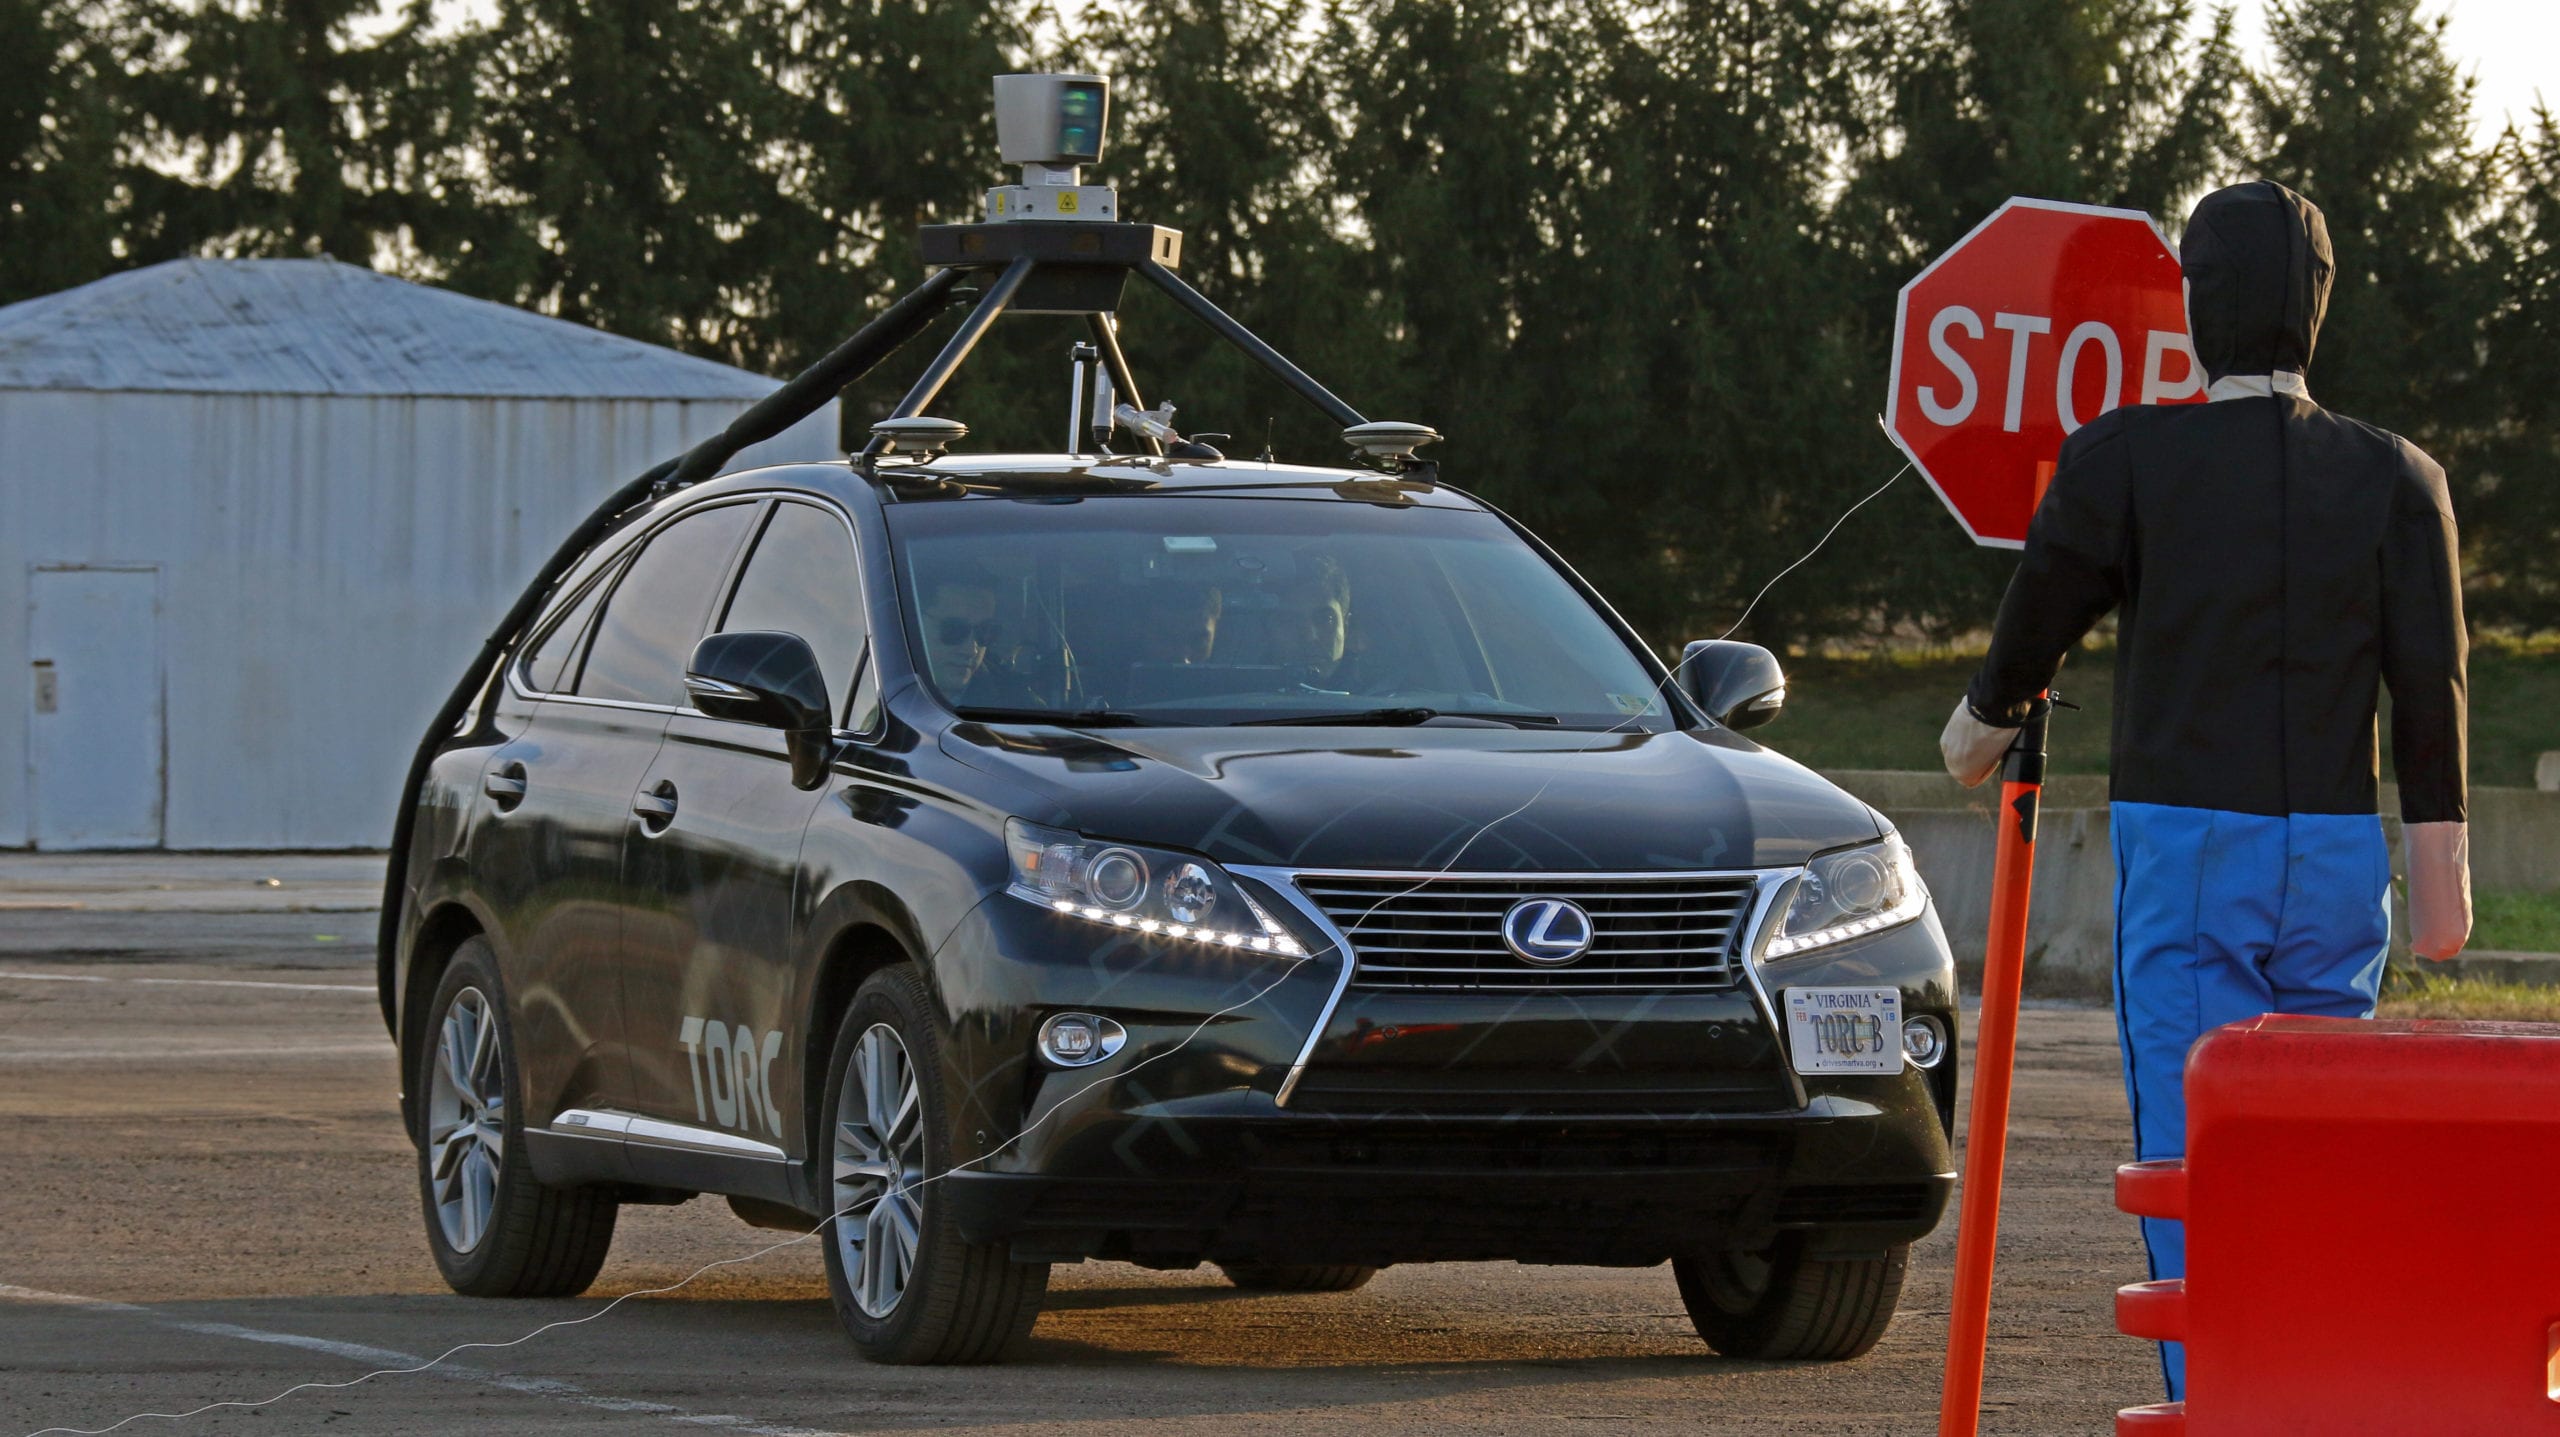 Torc's self-driving car technology being used in its autonomous vehicle Asimov